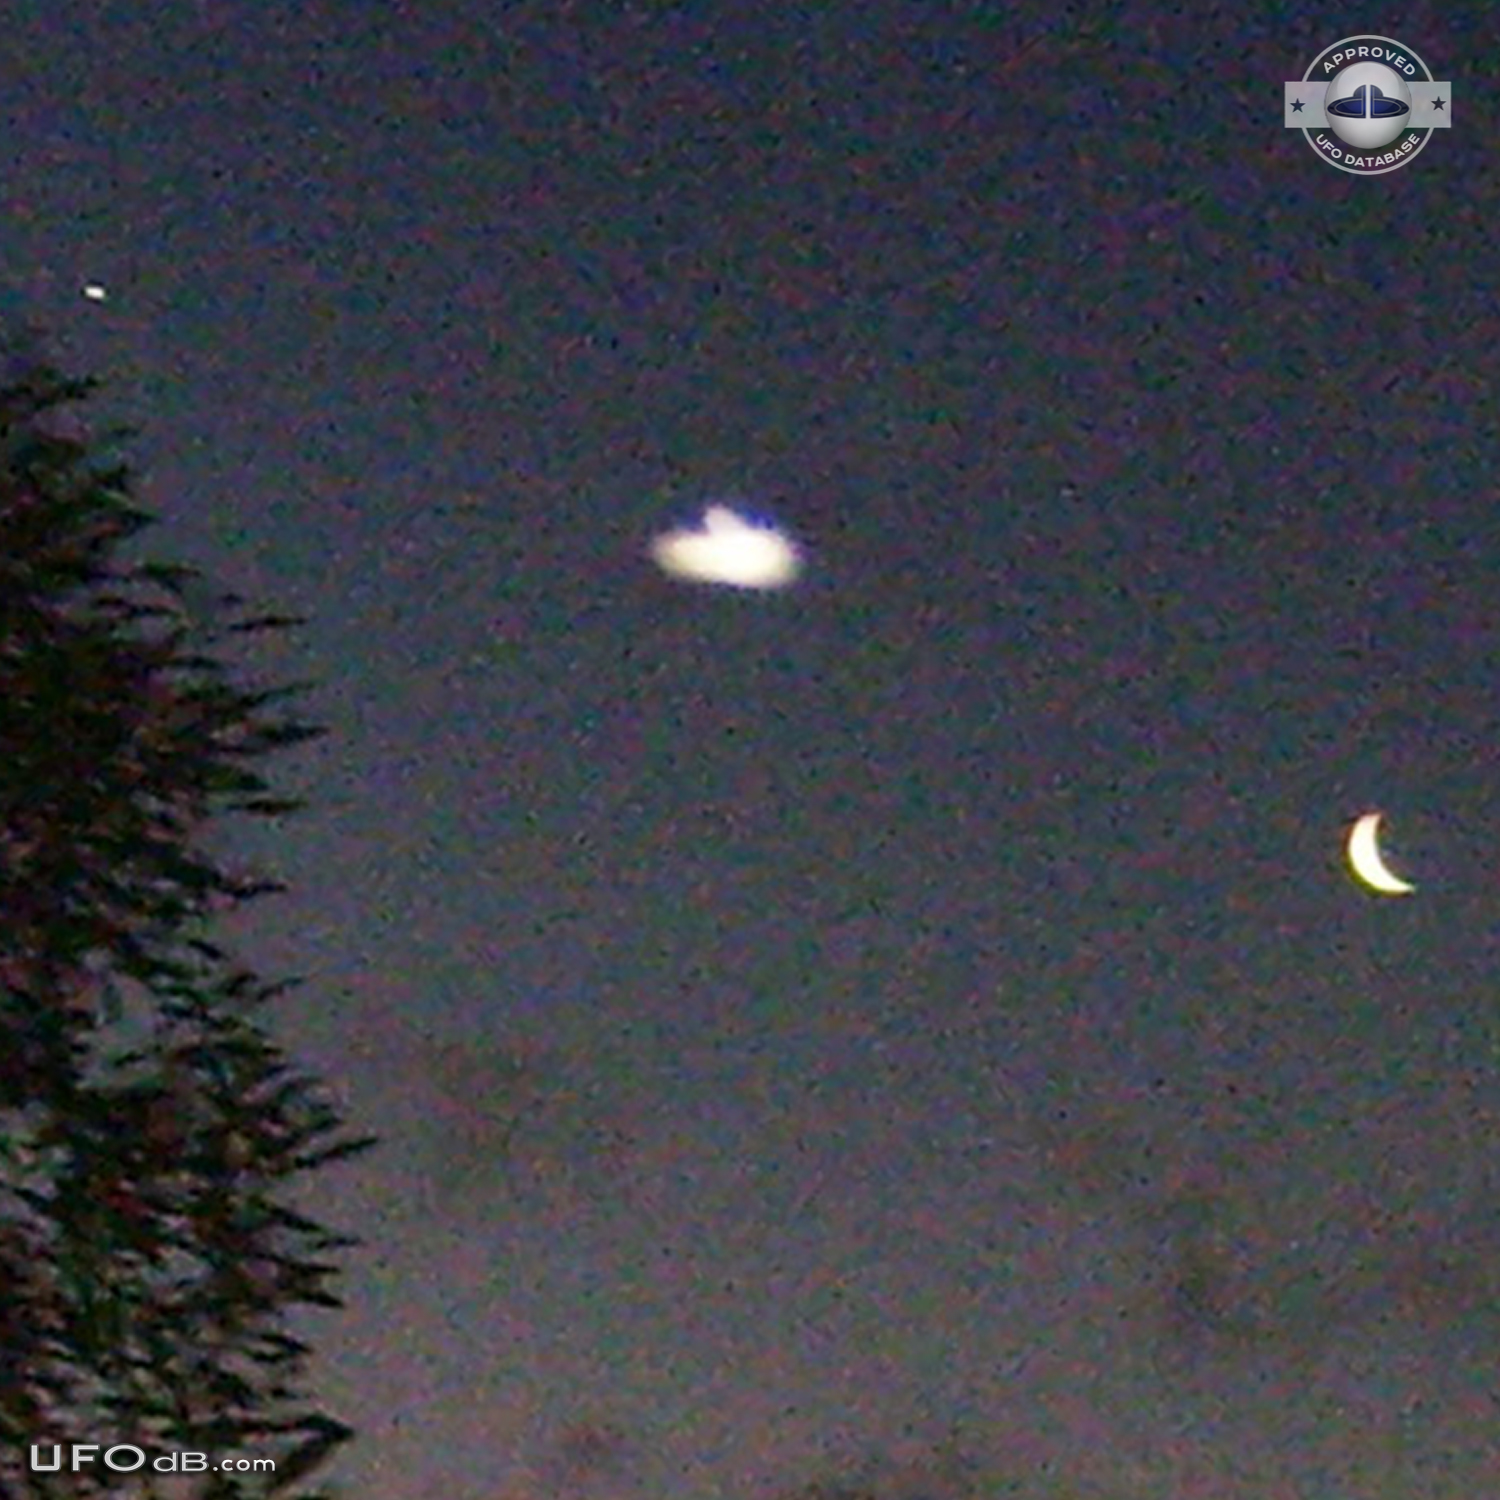 White Saucer ufo caught on picture at night over Curico, Chile - 2012 UFO Picture #406-3